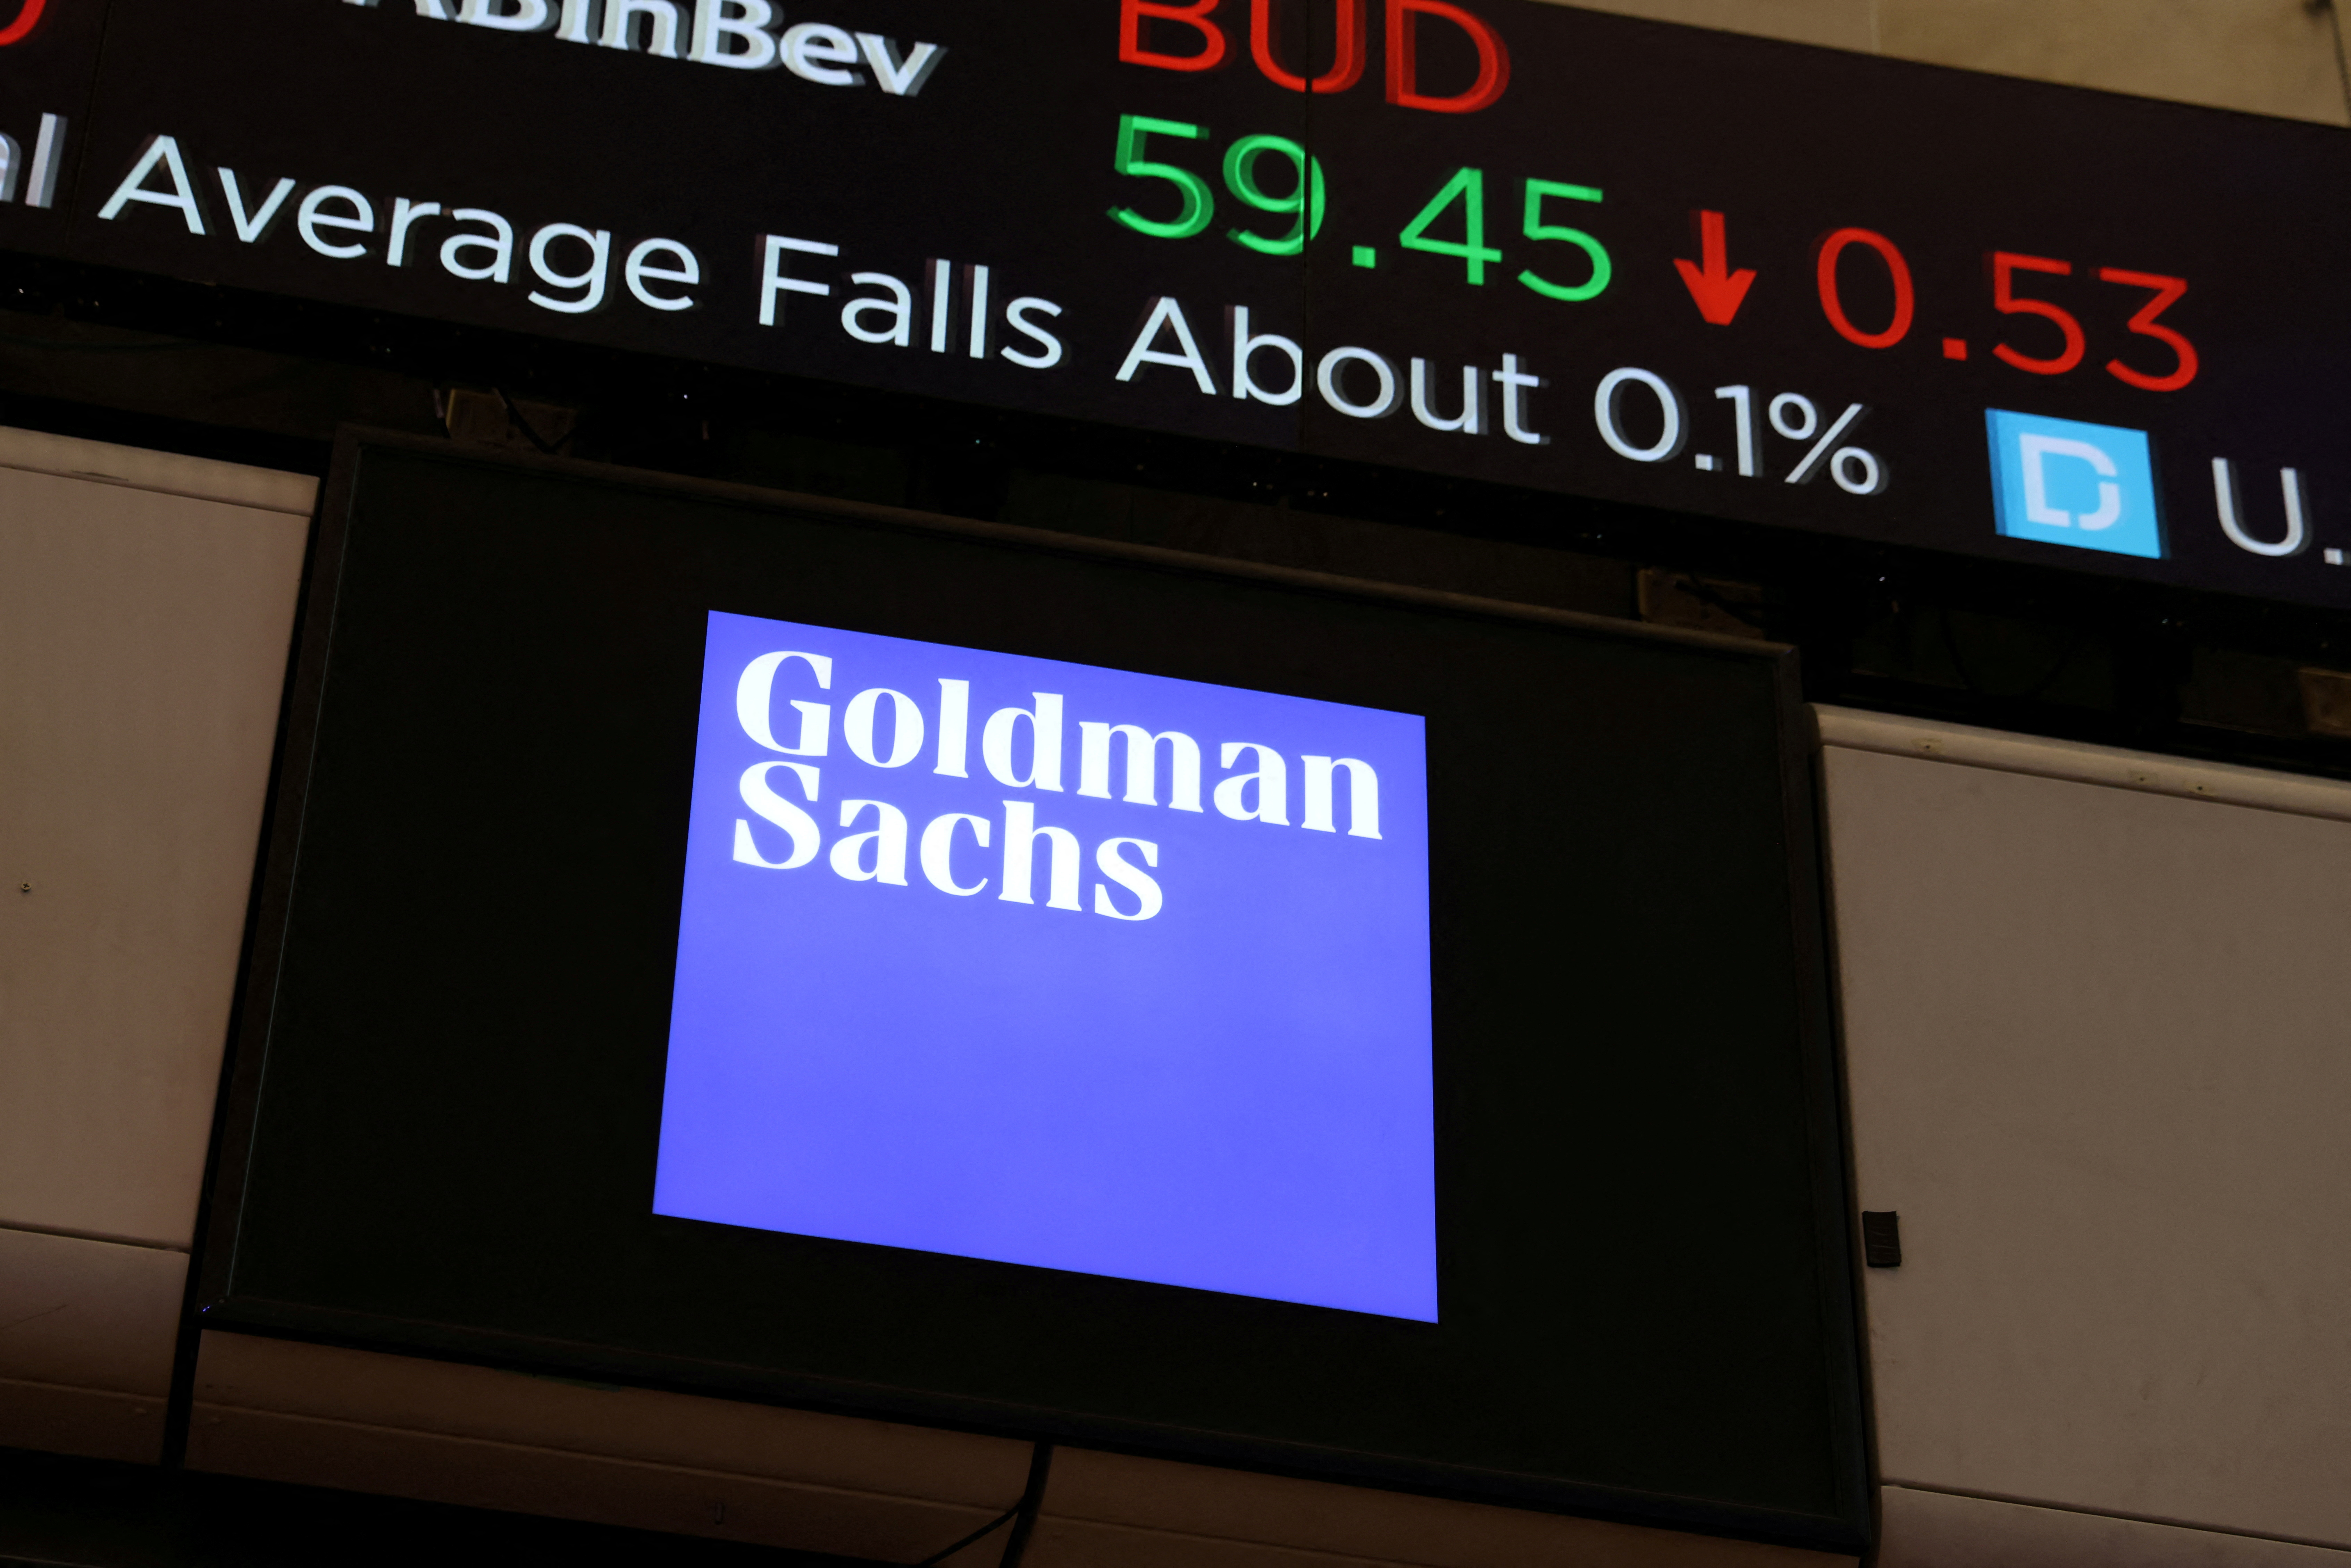 The Goldman Sachs logo is seen on the trading floor of the New York Stock Exchange (NYSE) in New York.